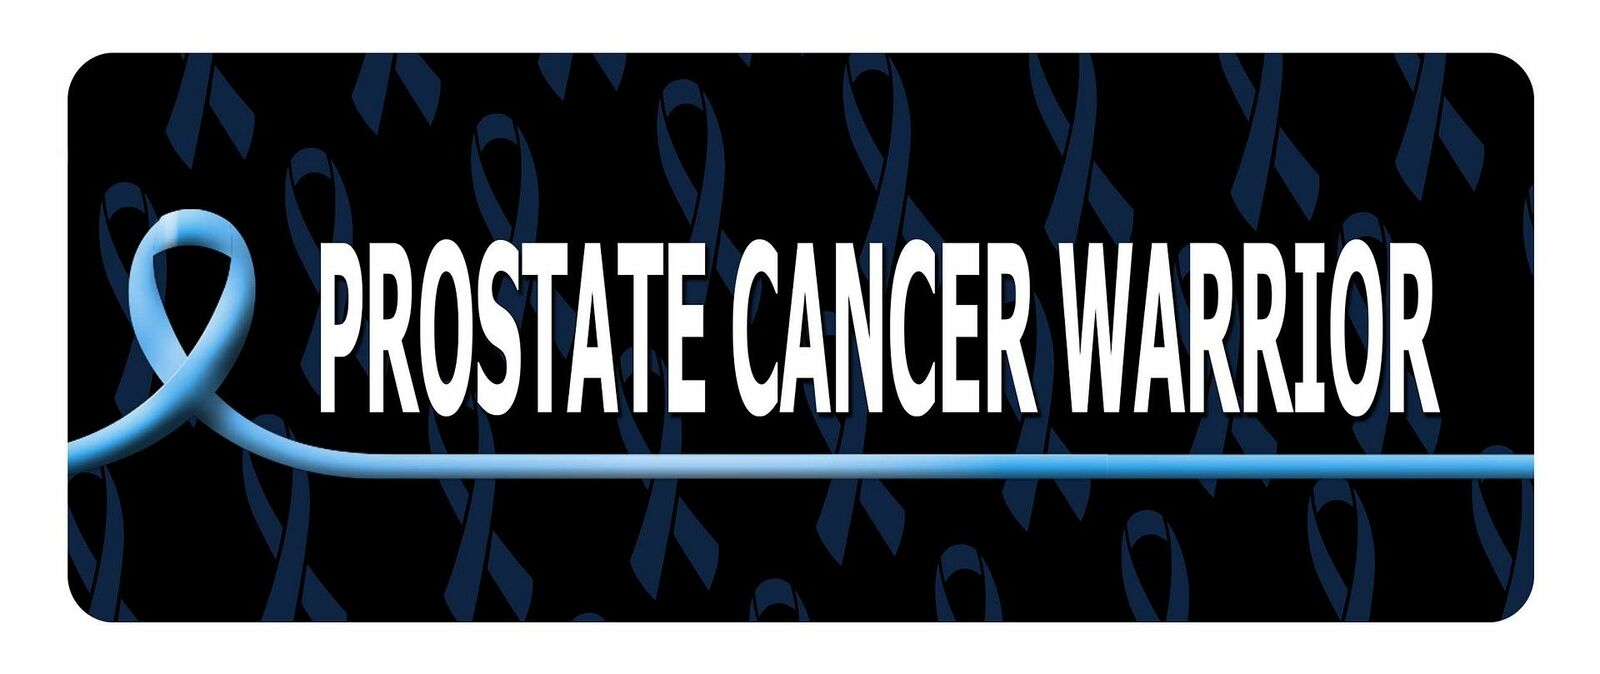 PROSTATE CANCER WARRIOR Cancer Awareness Car Laptop Wall Sticker 8by3 inc.